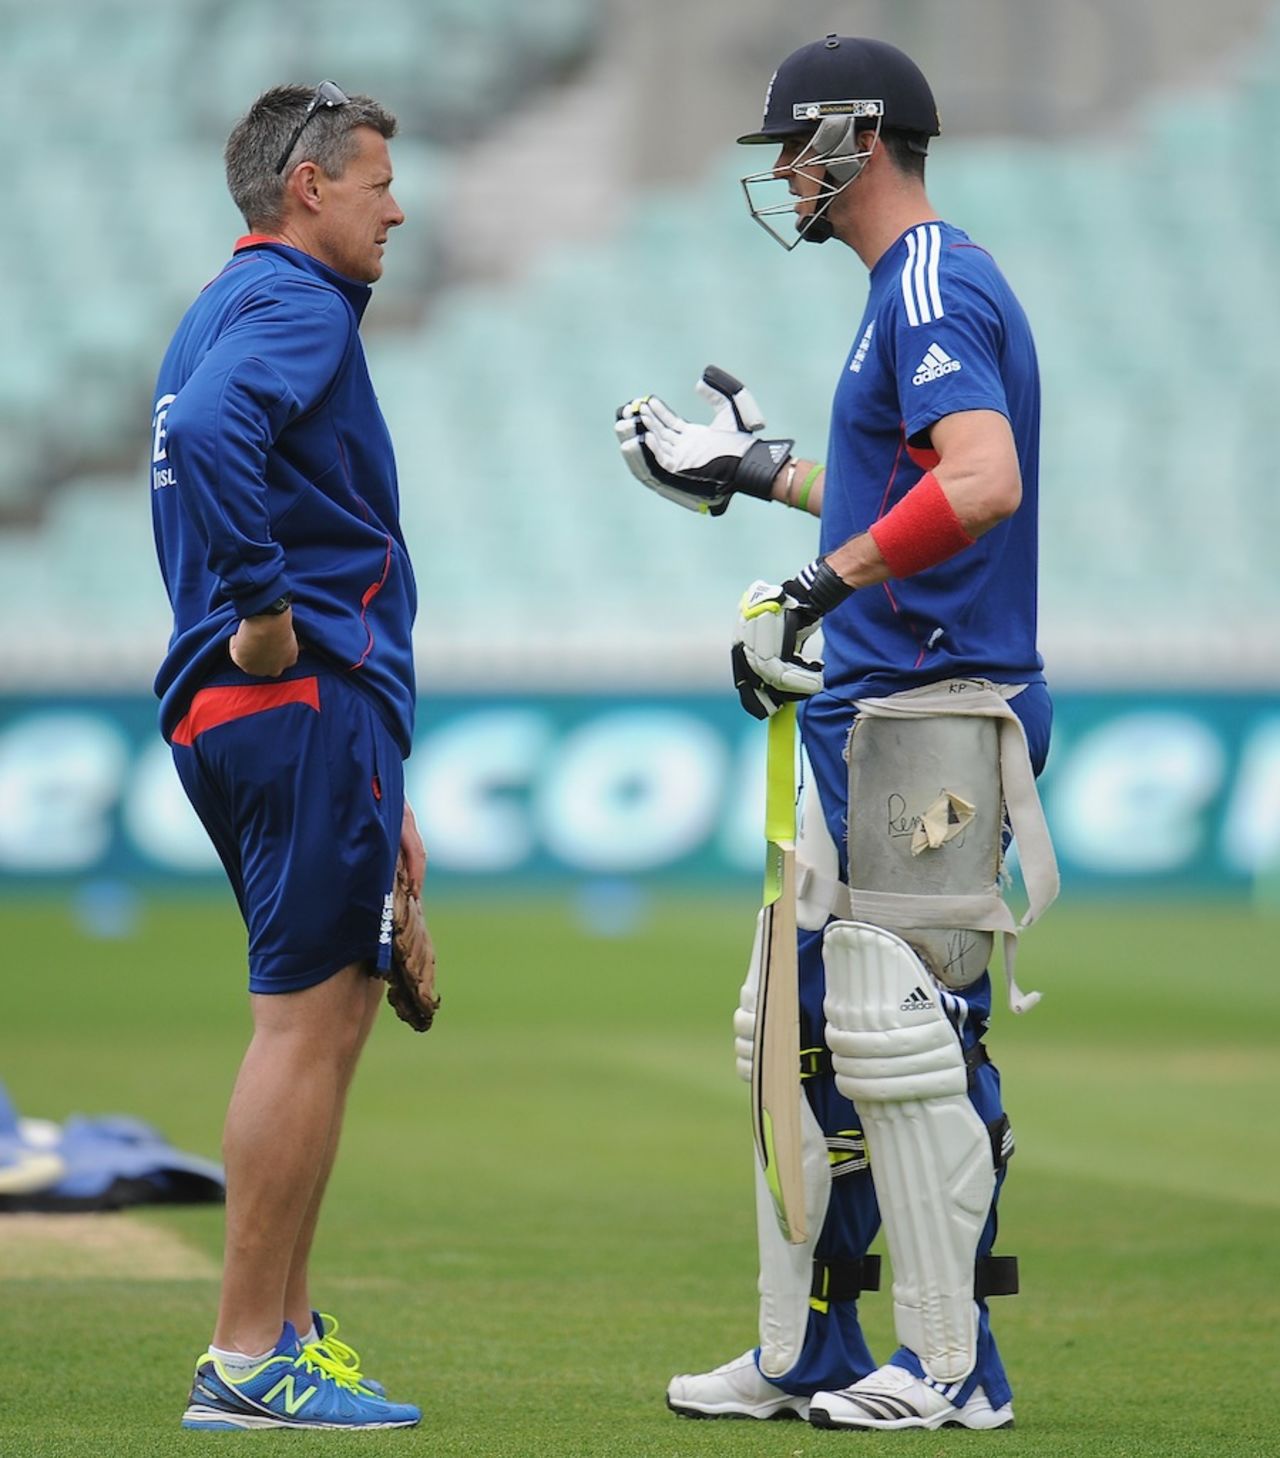 Kevin Pietersen has a chat with Ashley Giles, The Oval, June 12, 2013